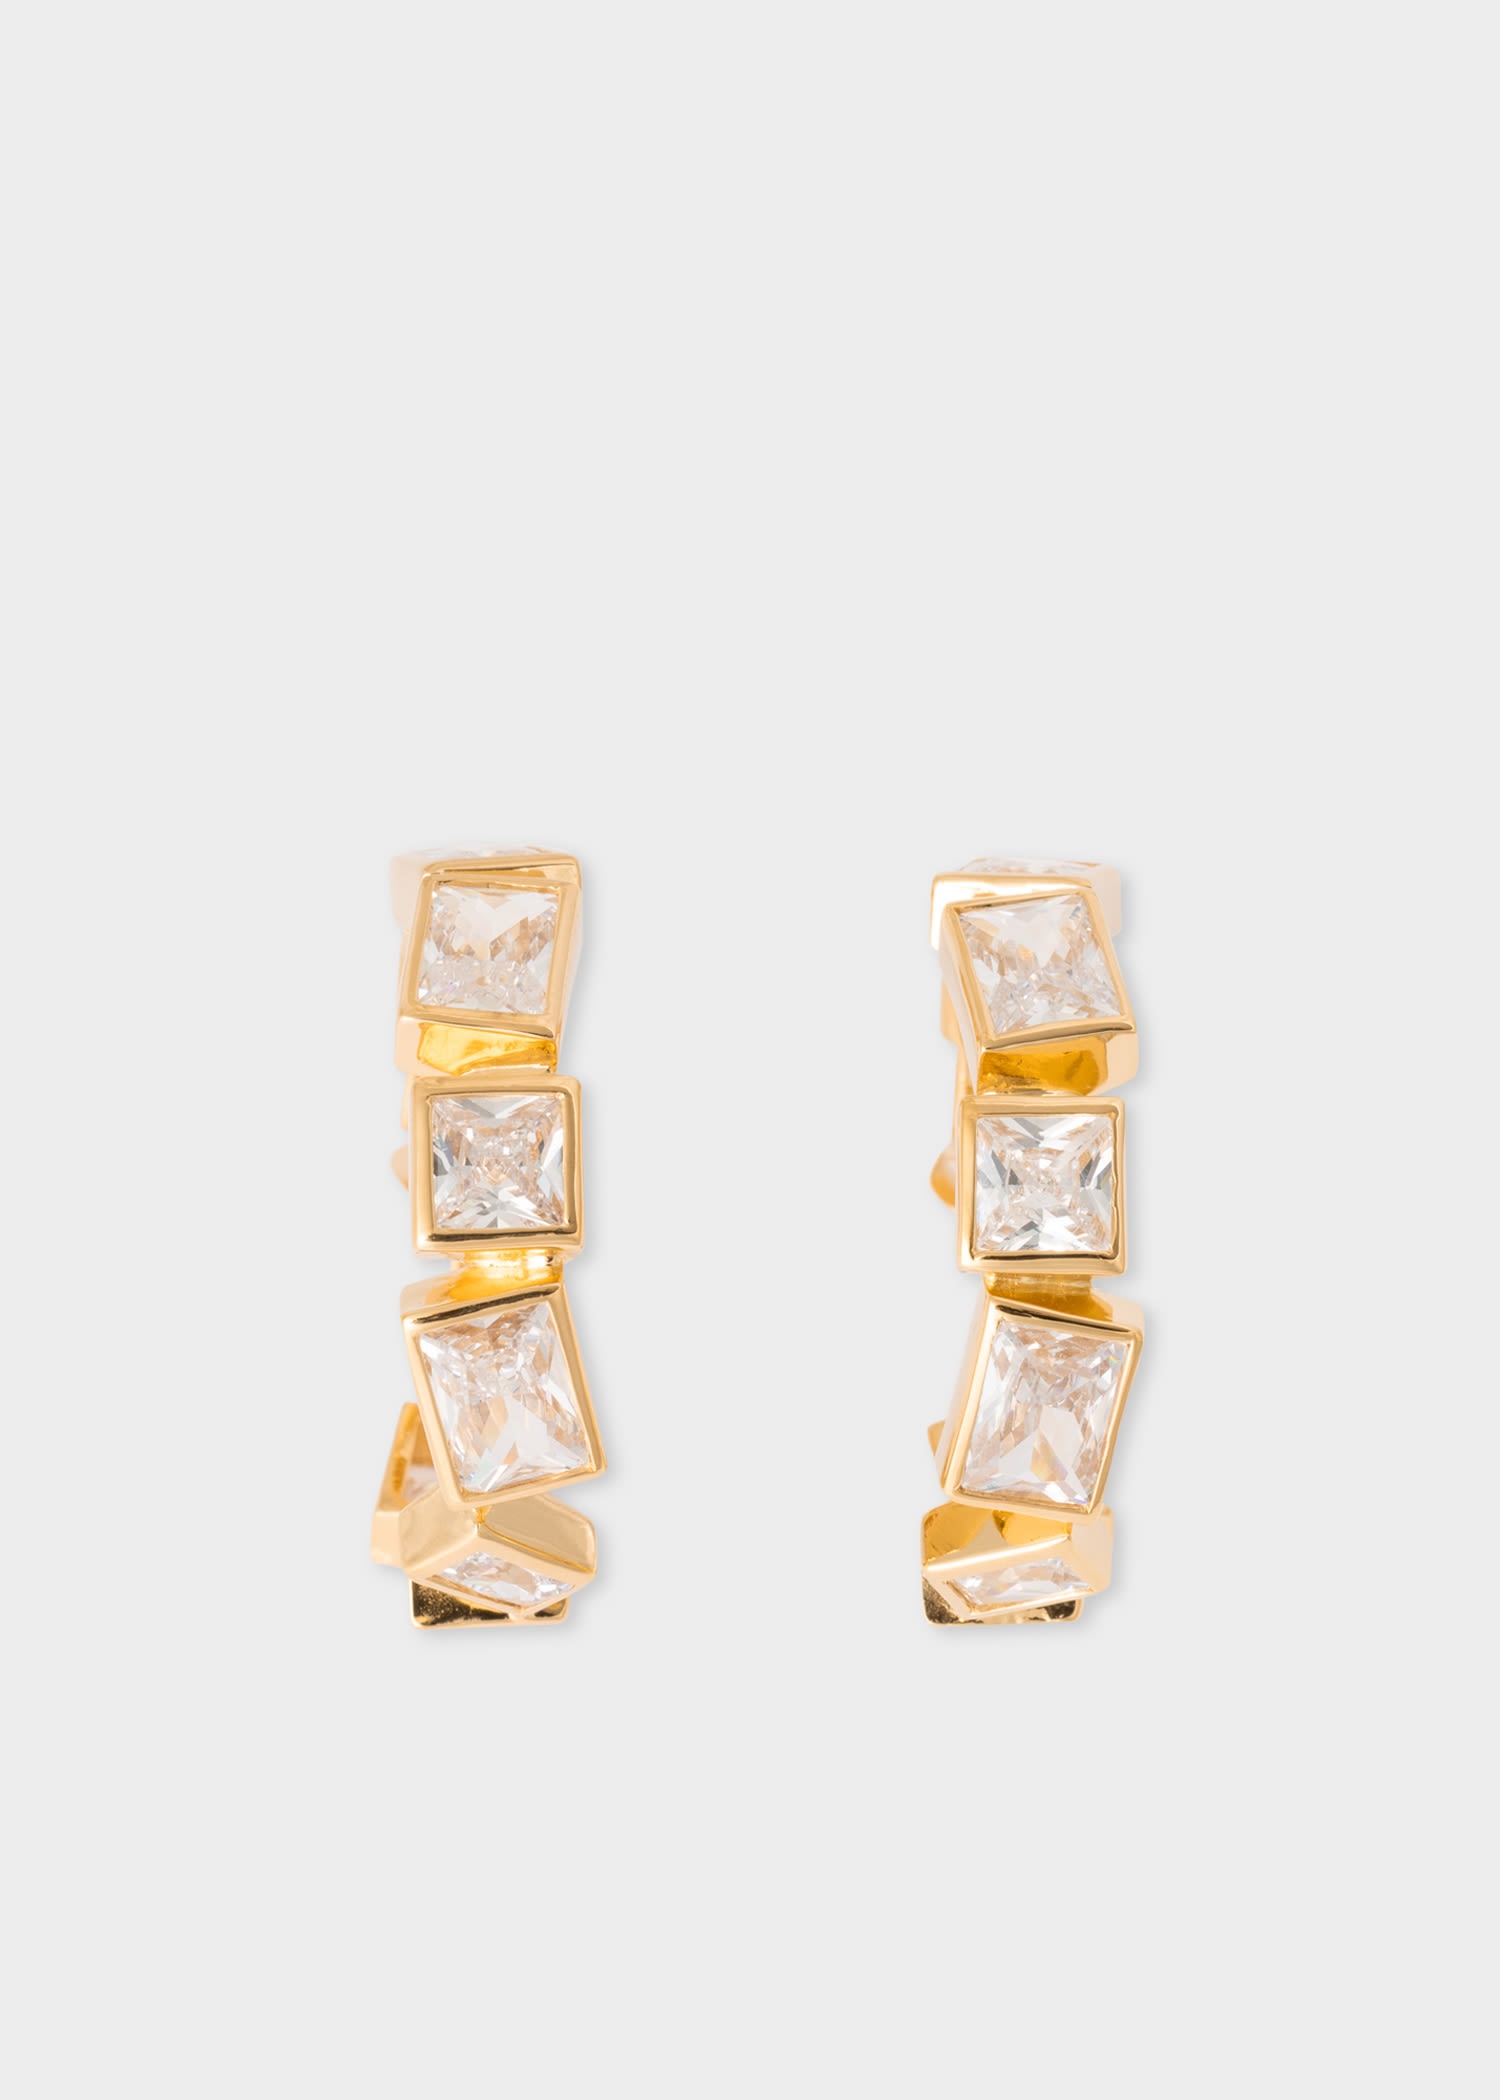 Cubic Zirconia & Gold Earrings by Completedworks - 1